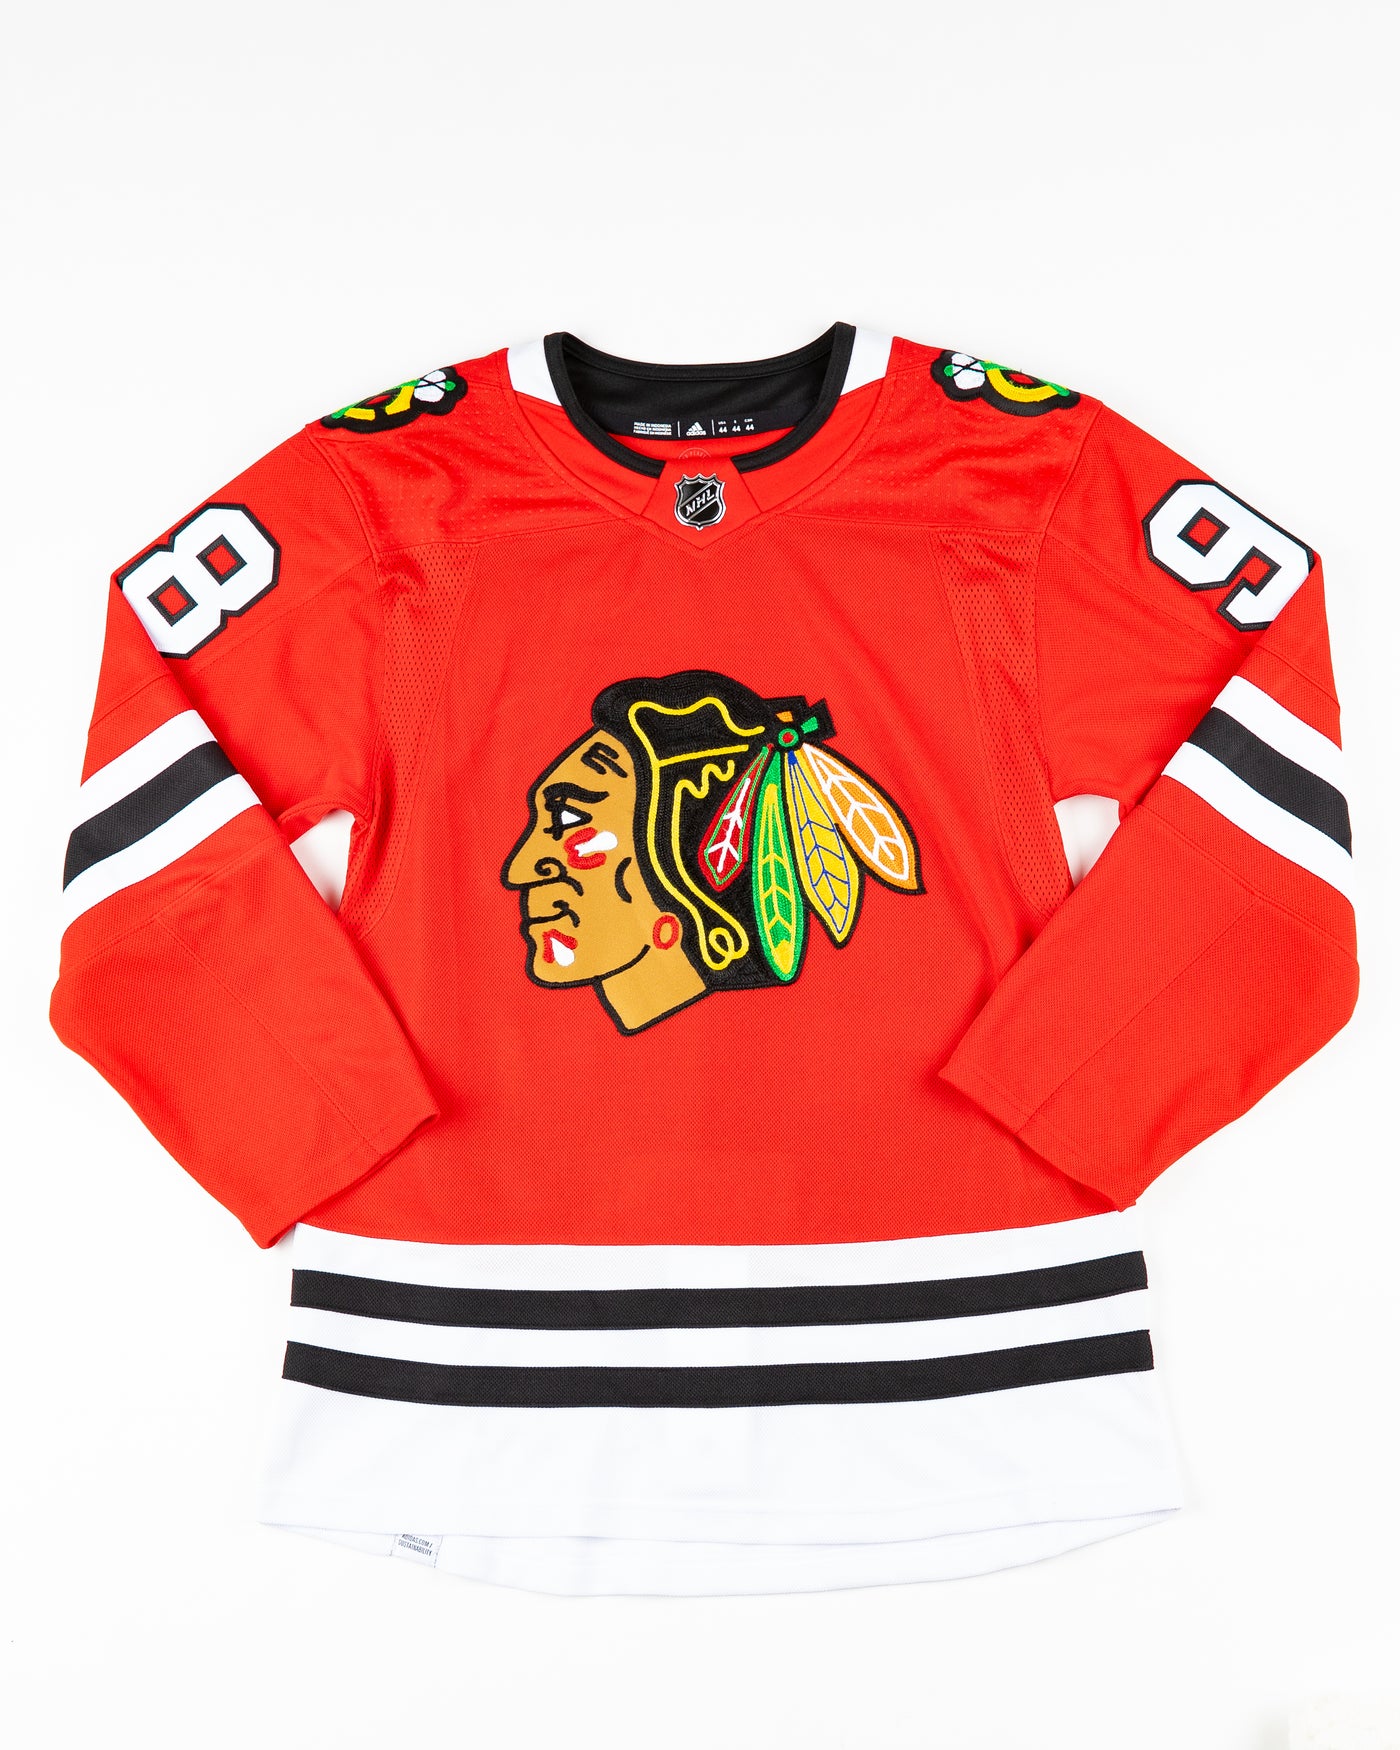 adidas red home Chicago Blackhawks hockey jersey with Connor Bedard name and number - front lay flat